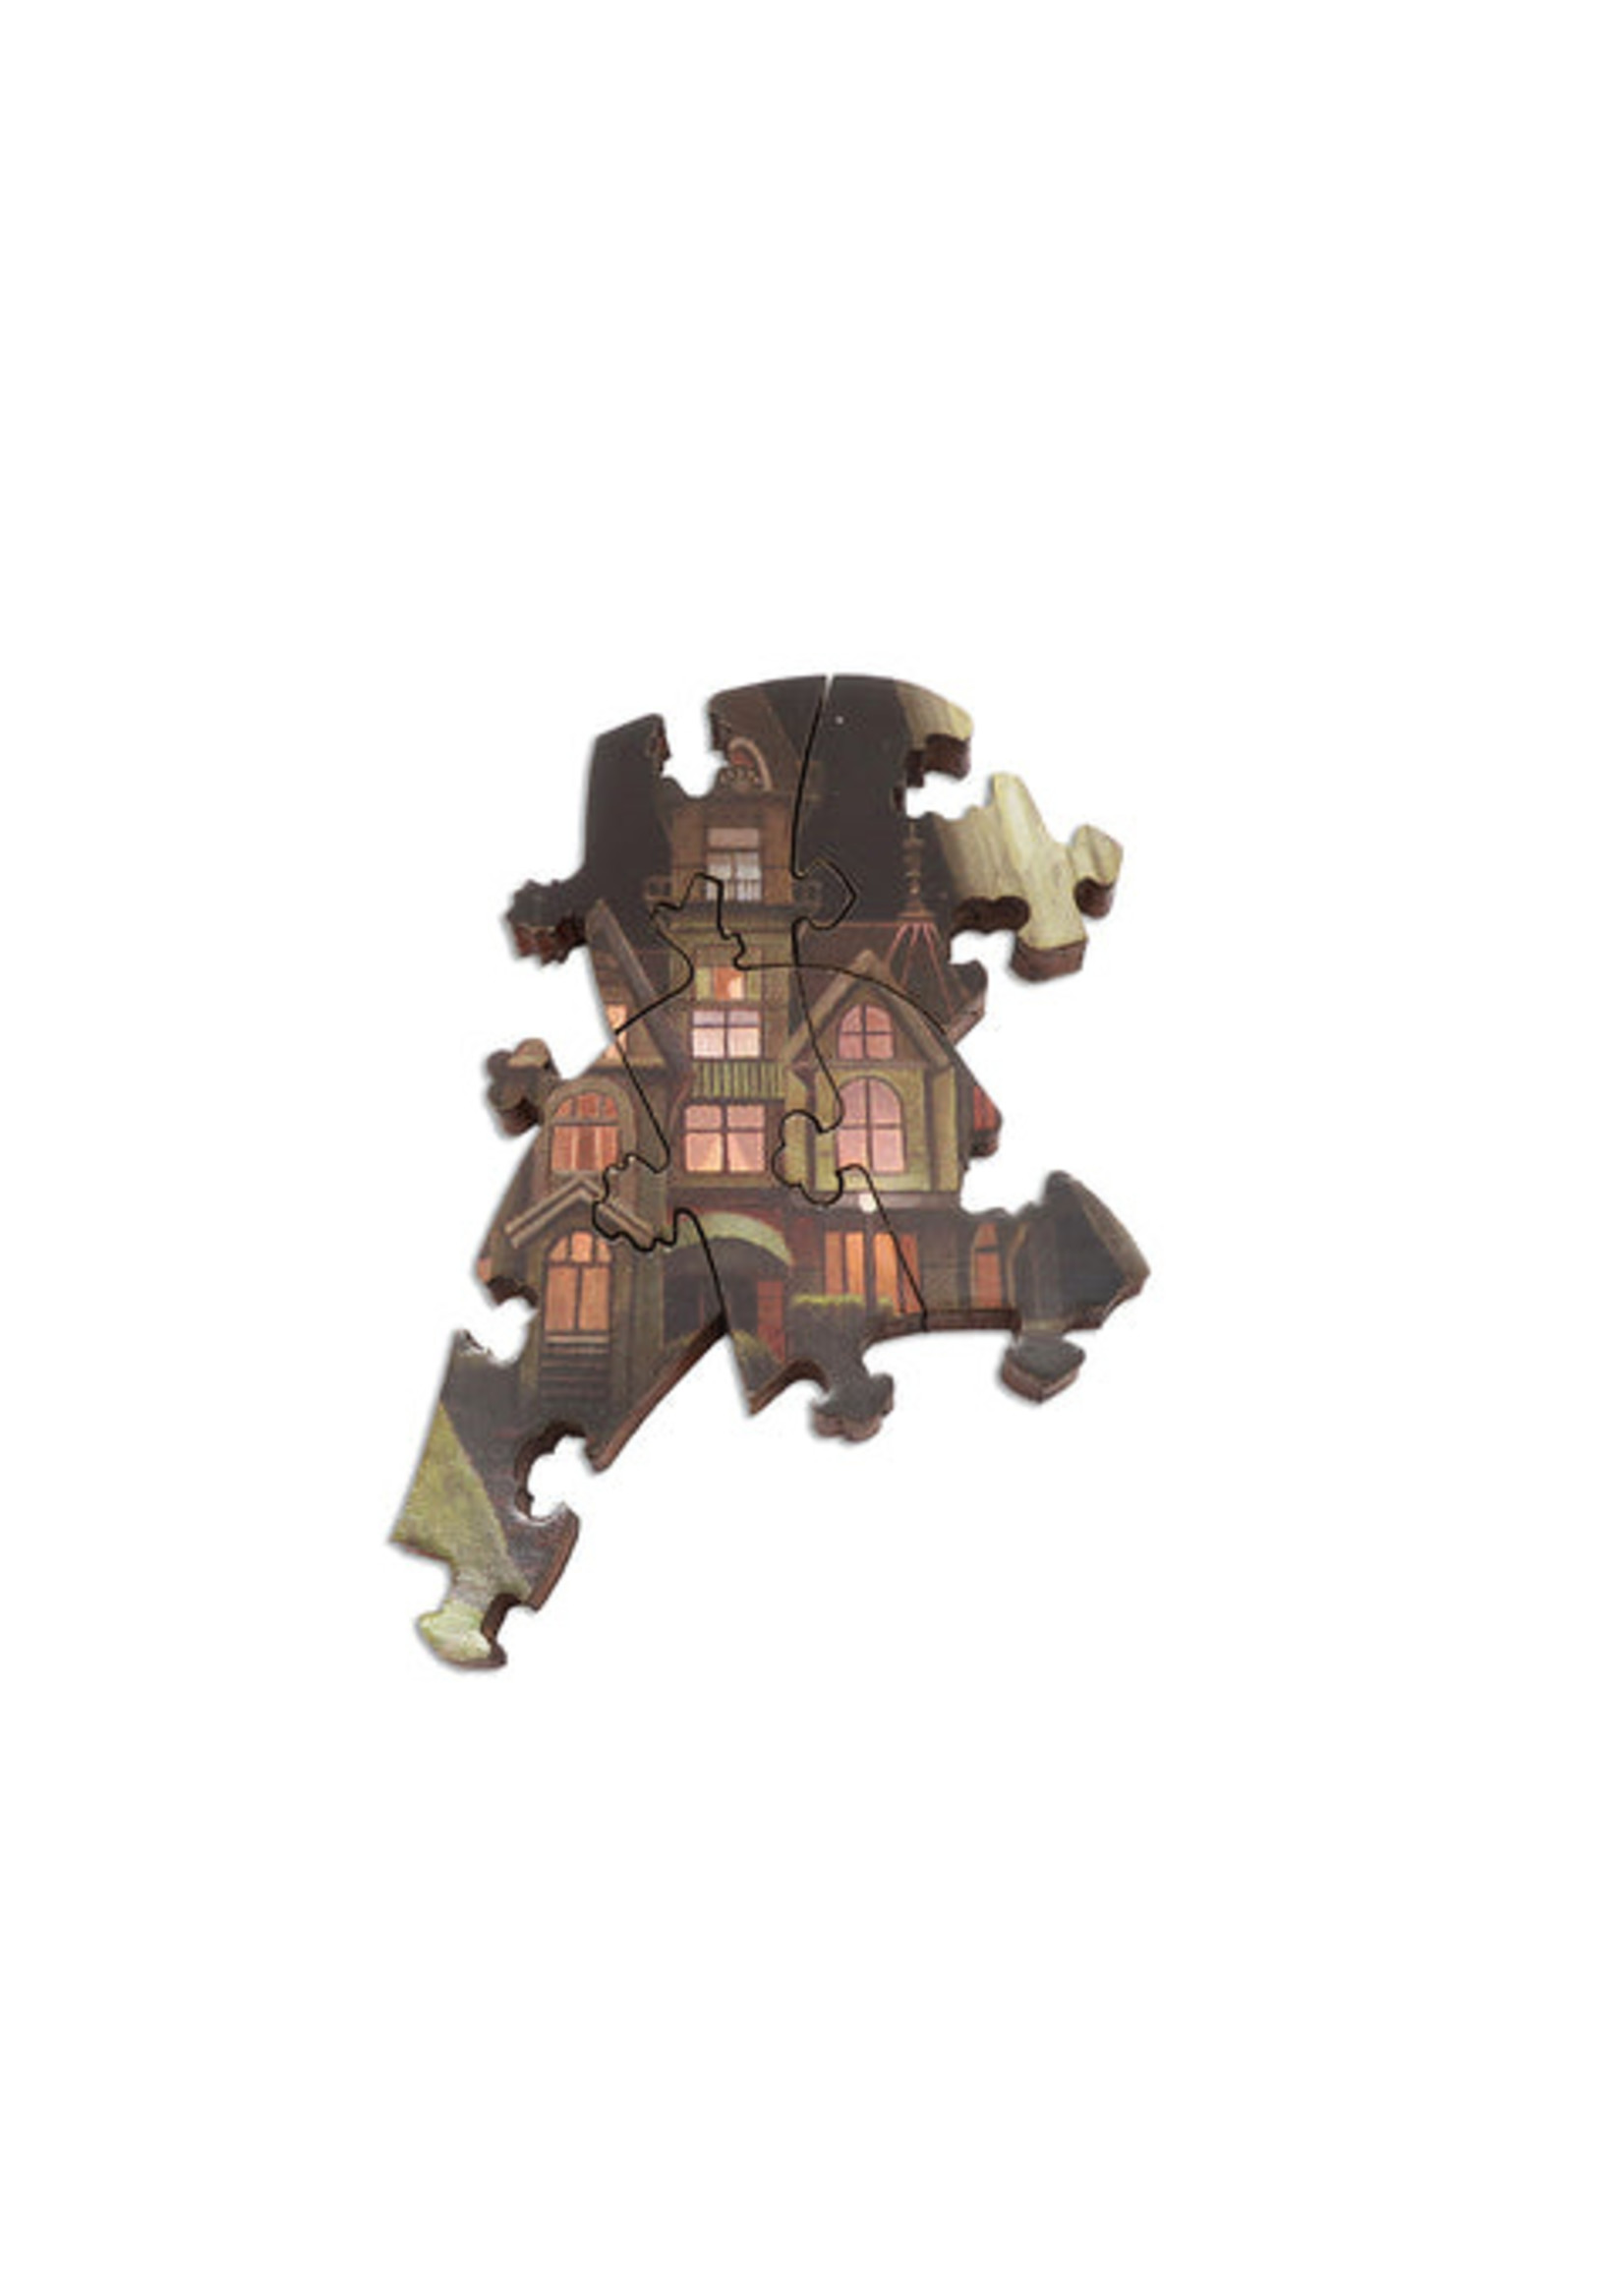 Artifact Puzzles "Interpretations of Home" Wooden Jigsaw Puzzle